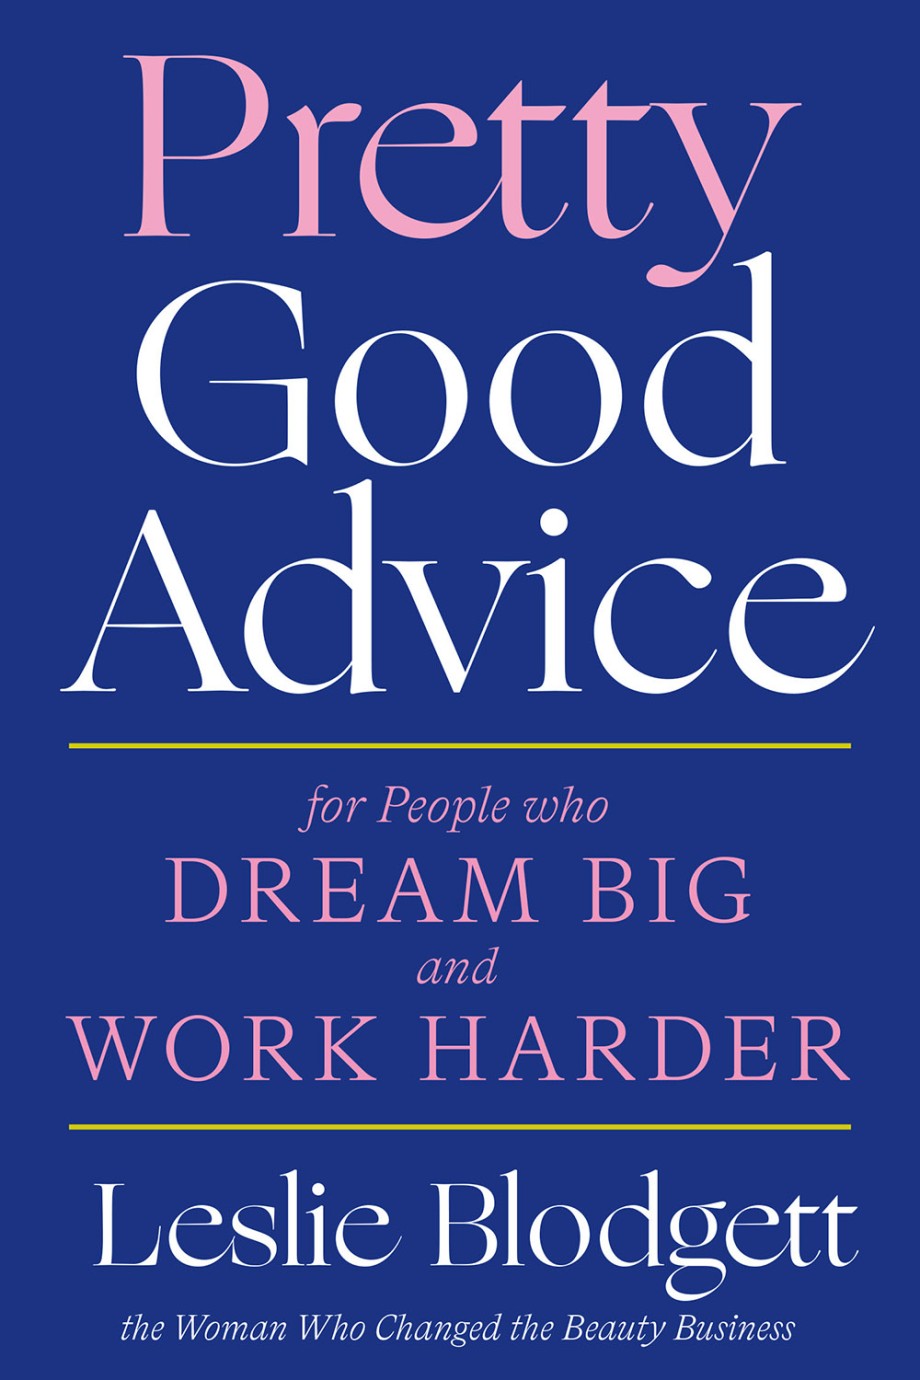 Pretty Good Advice For People Who Dream Big and Work Harder